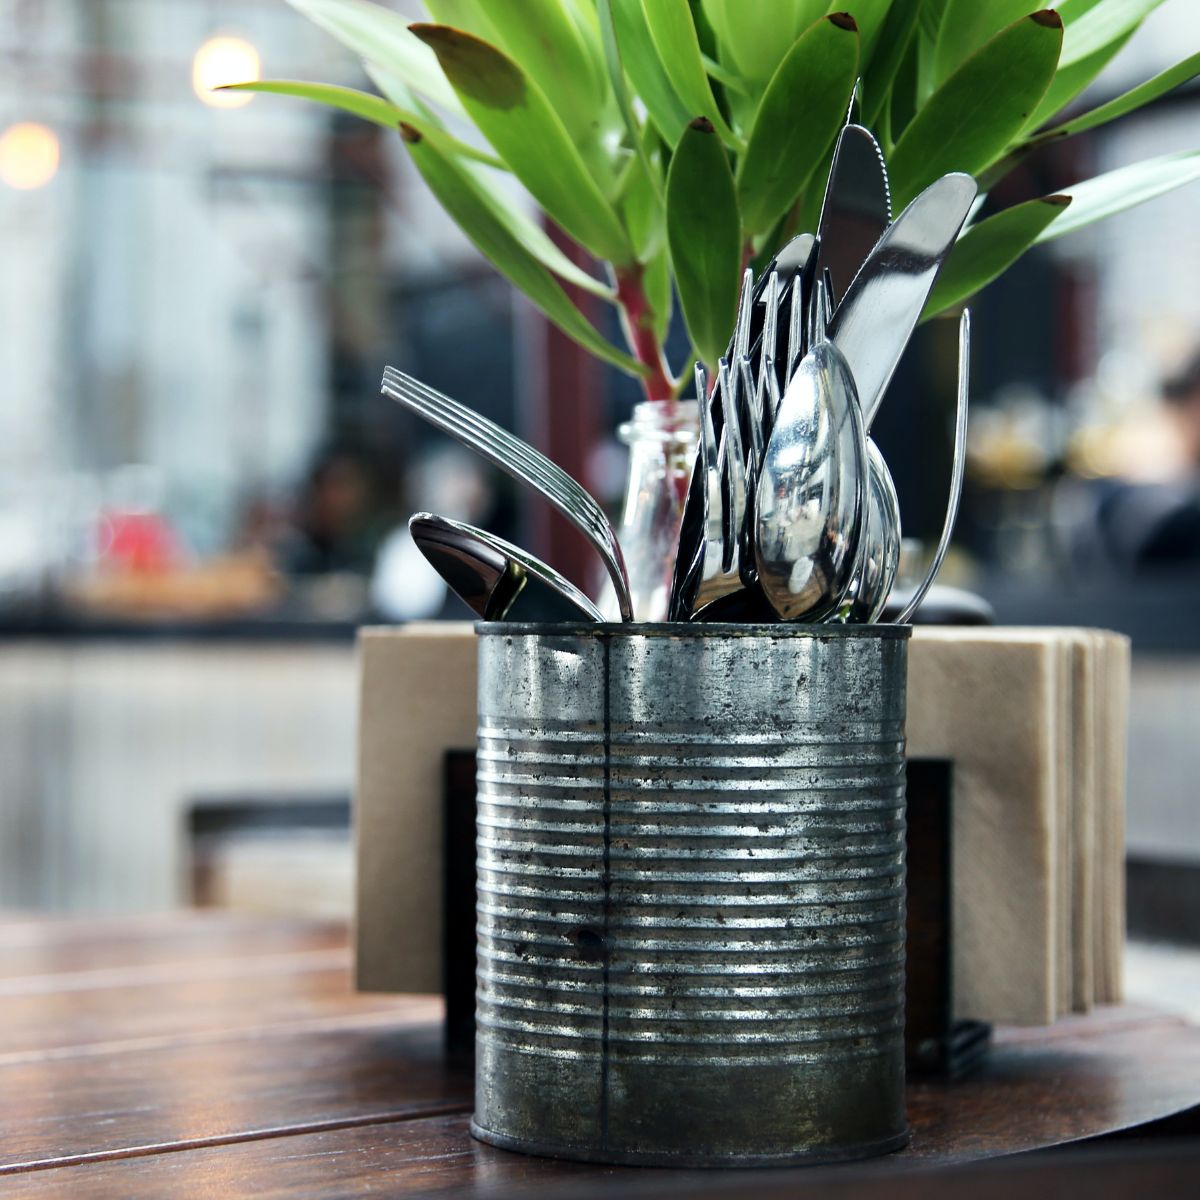 A metal can holds eating untensils on a table next to a plant.